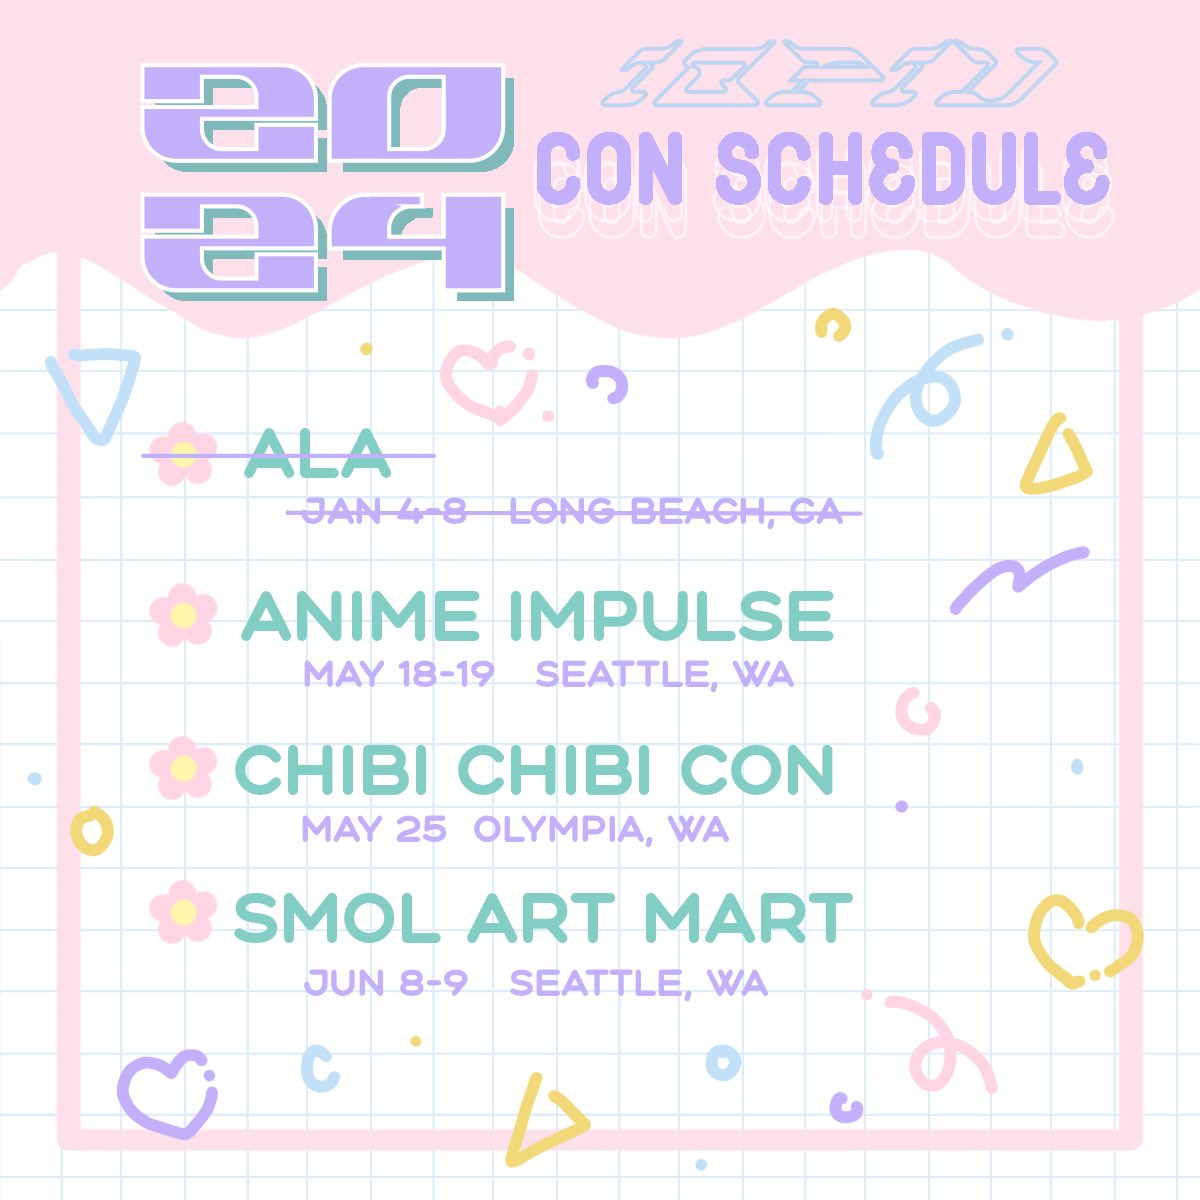 Upcoming con schedule ✨ ‼️ New designs debuting at anime impulse ‼️